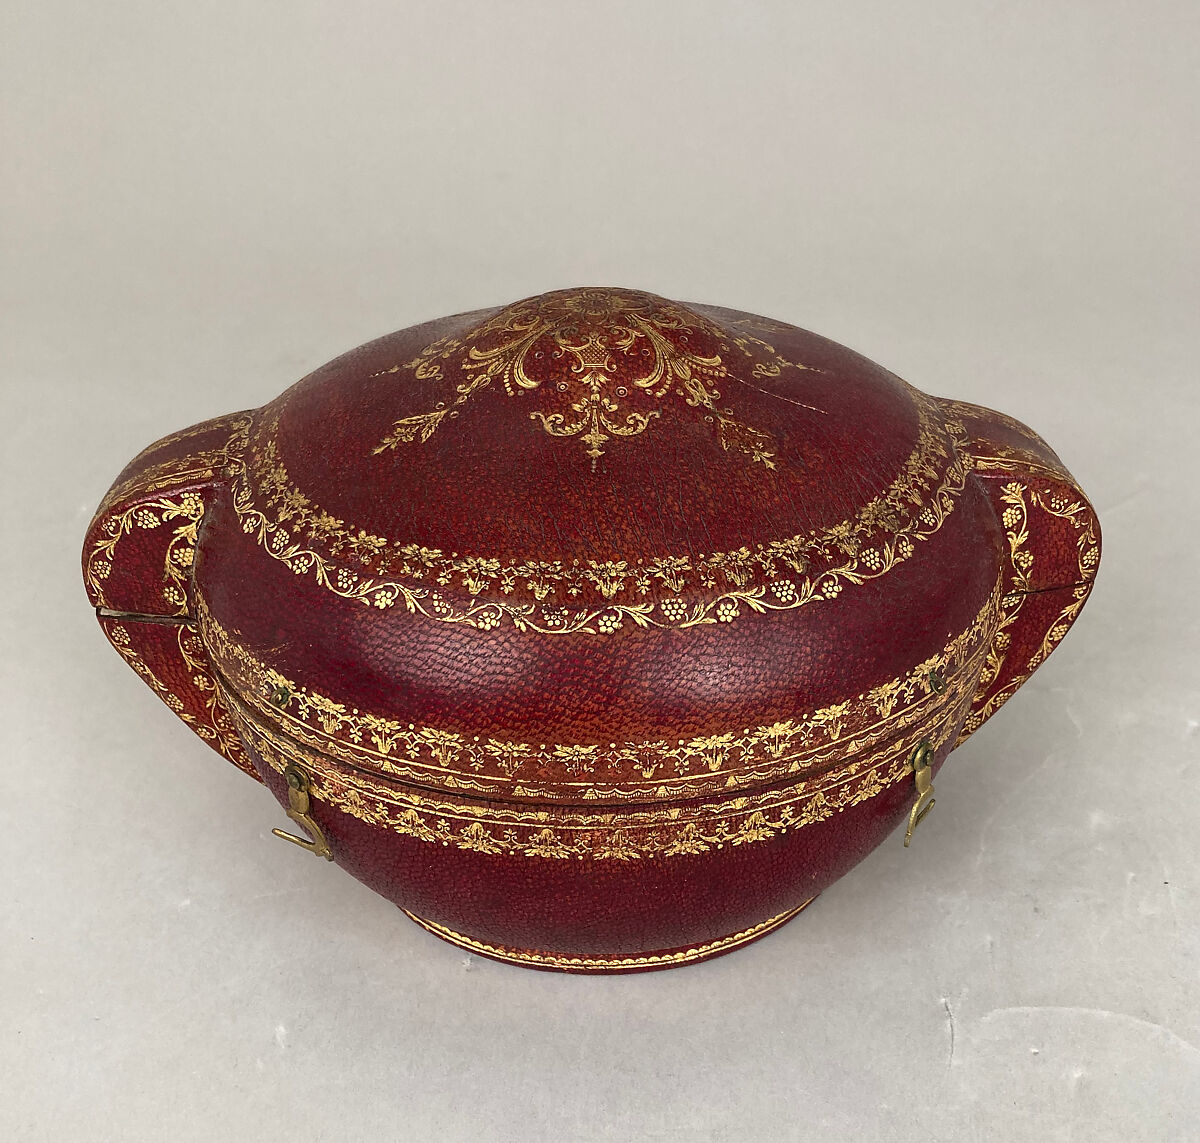 Case for covered bowl, Leather, possibly French 